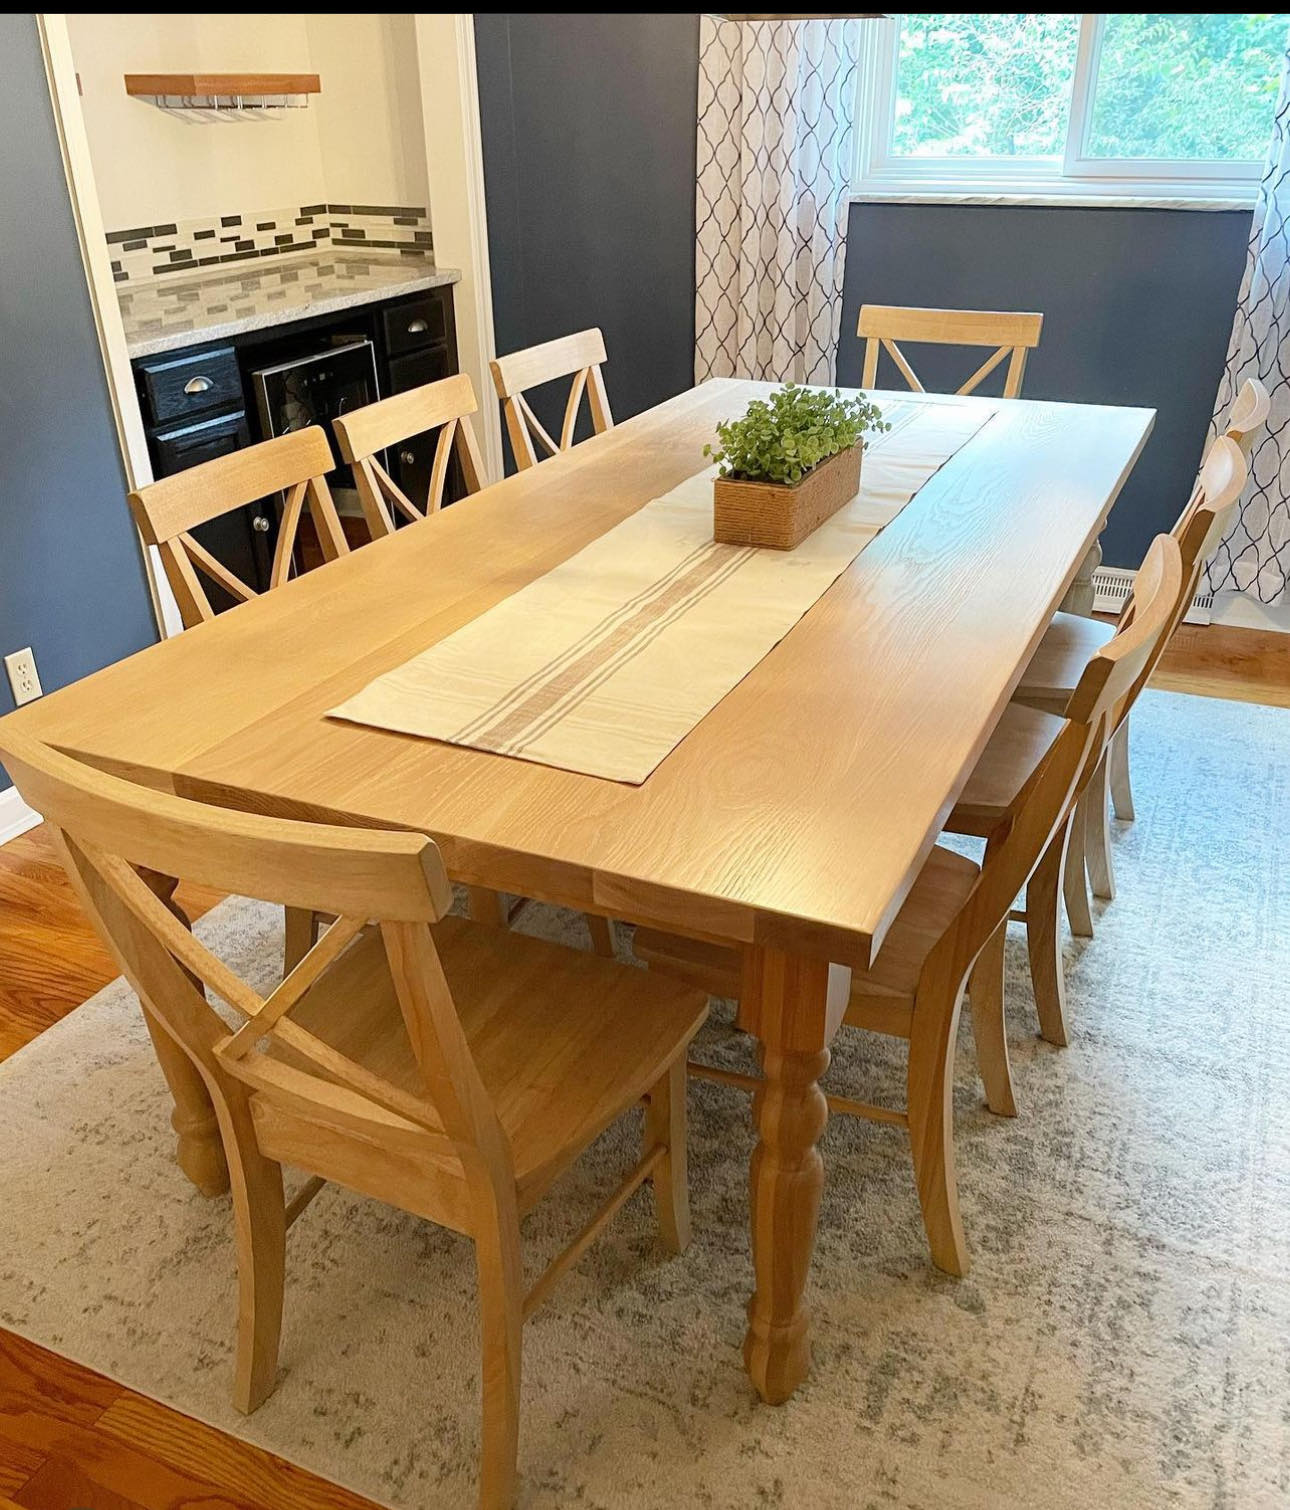 8' x 42" White Oak Country Cottage Dining Table with 8 Single Cross Back Chairs